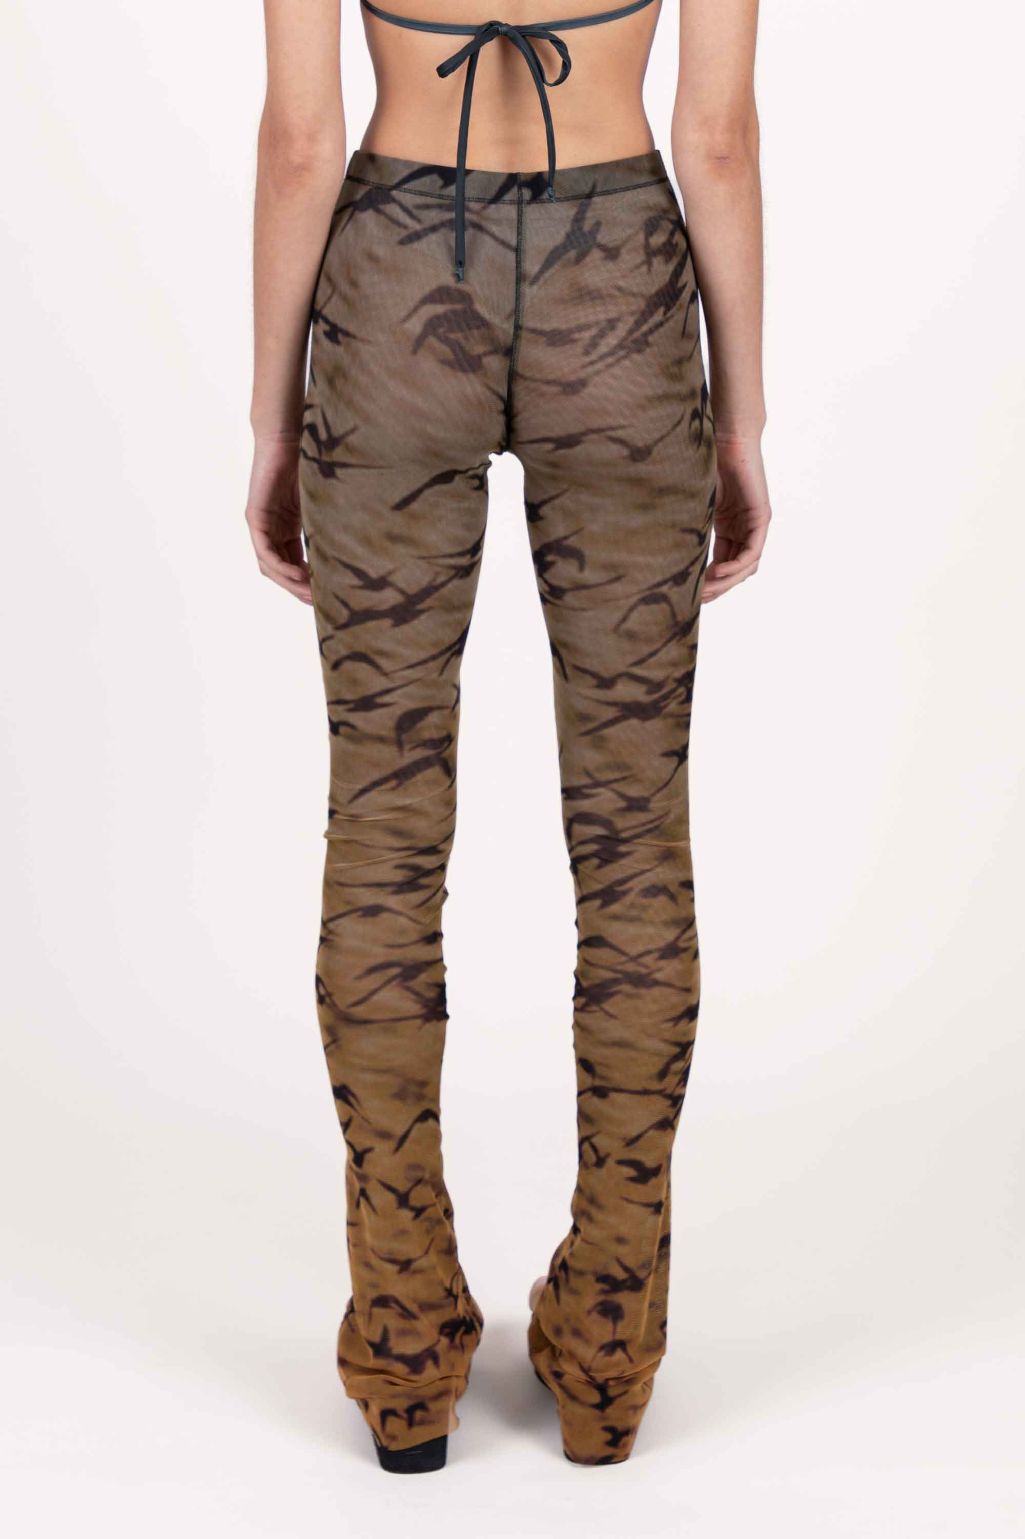 Sunset Sparrows Mesh Fitted Pants